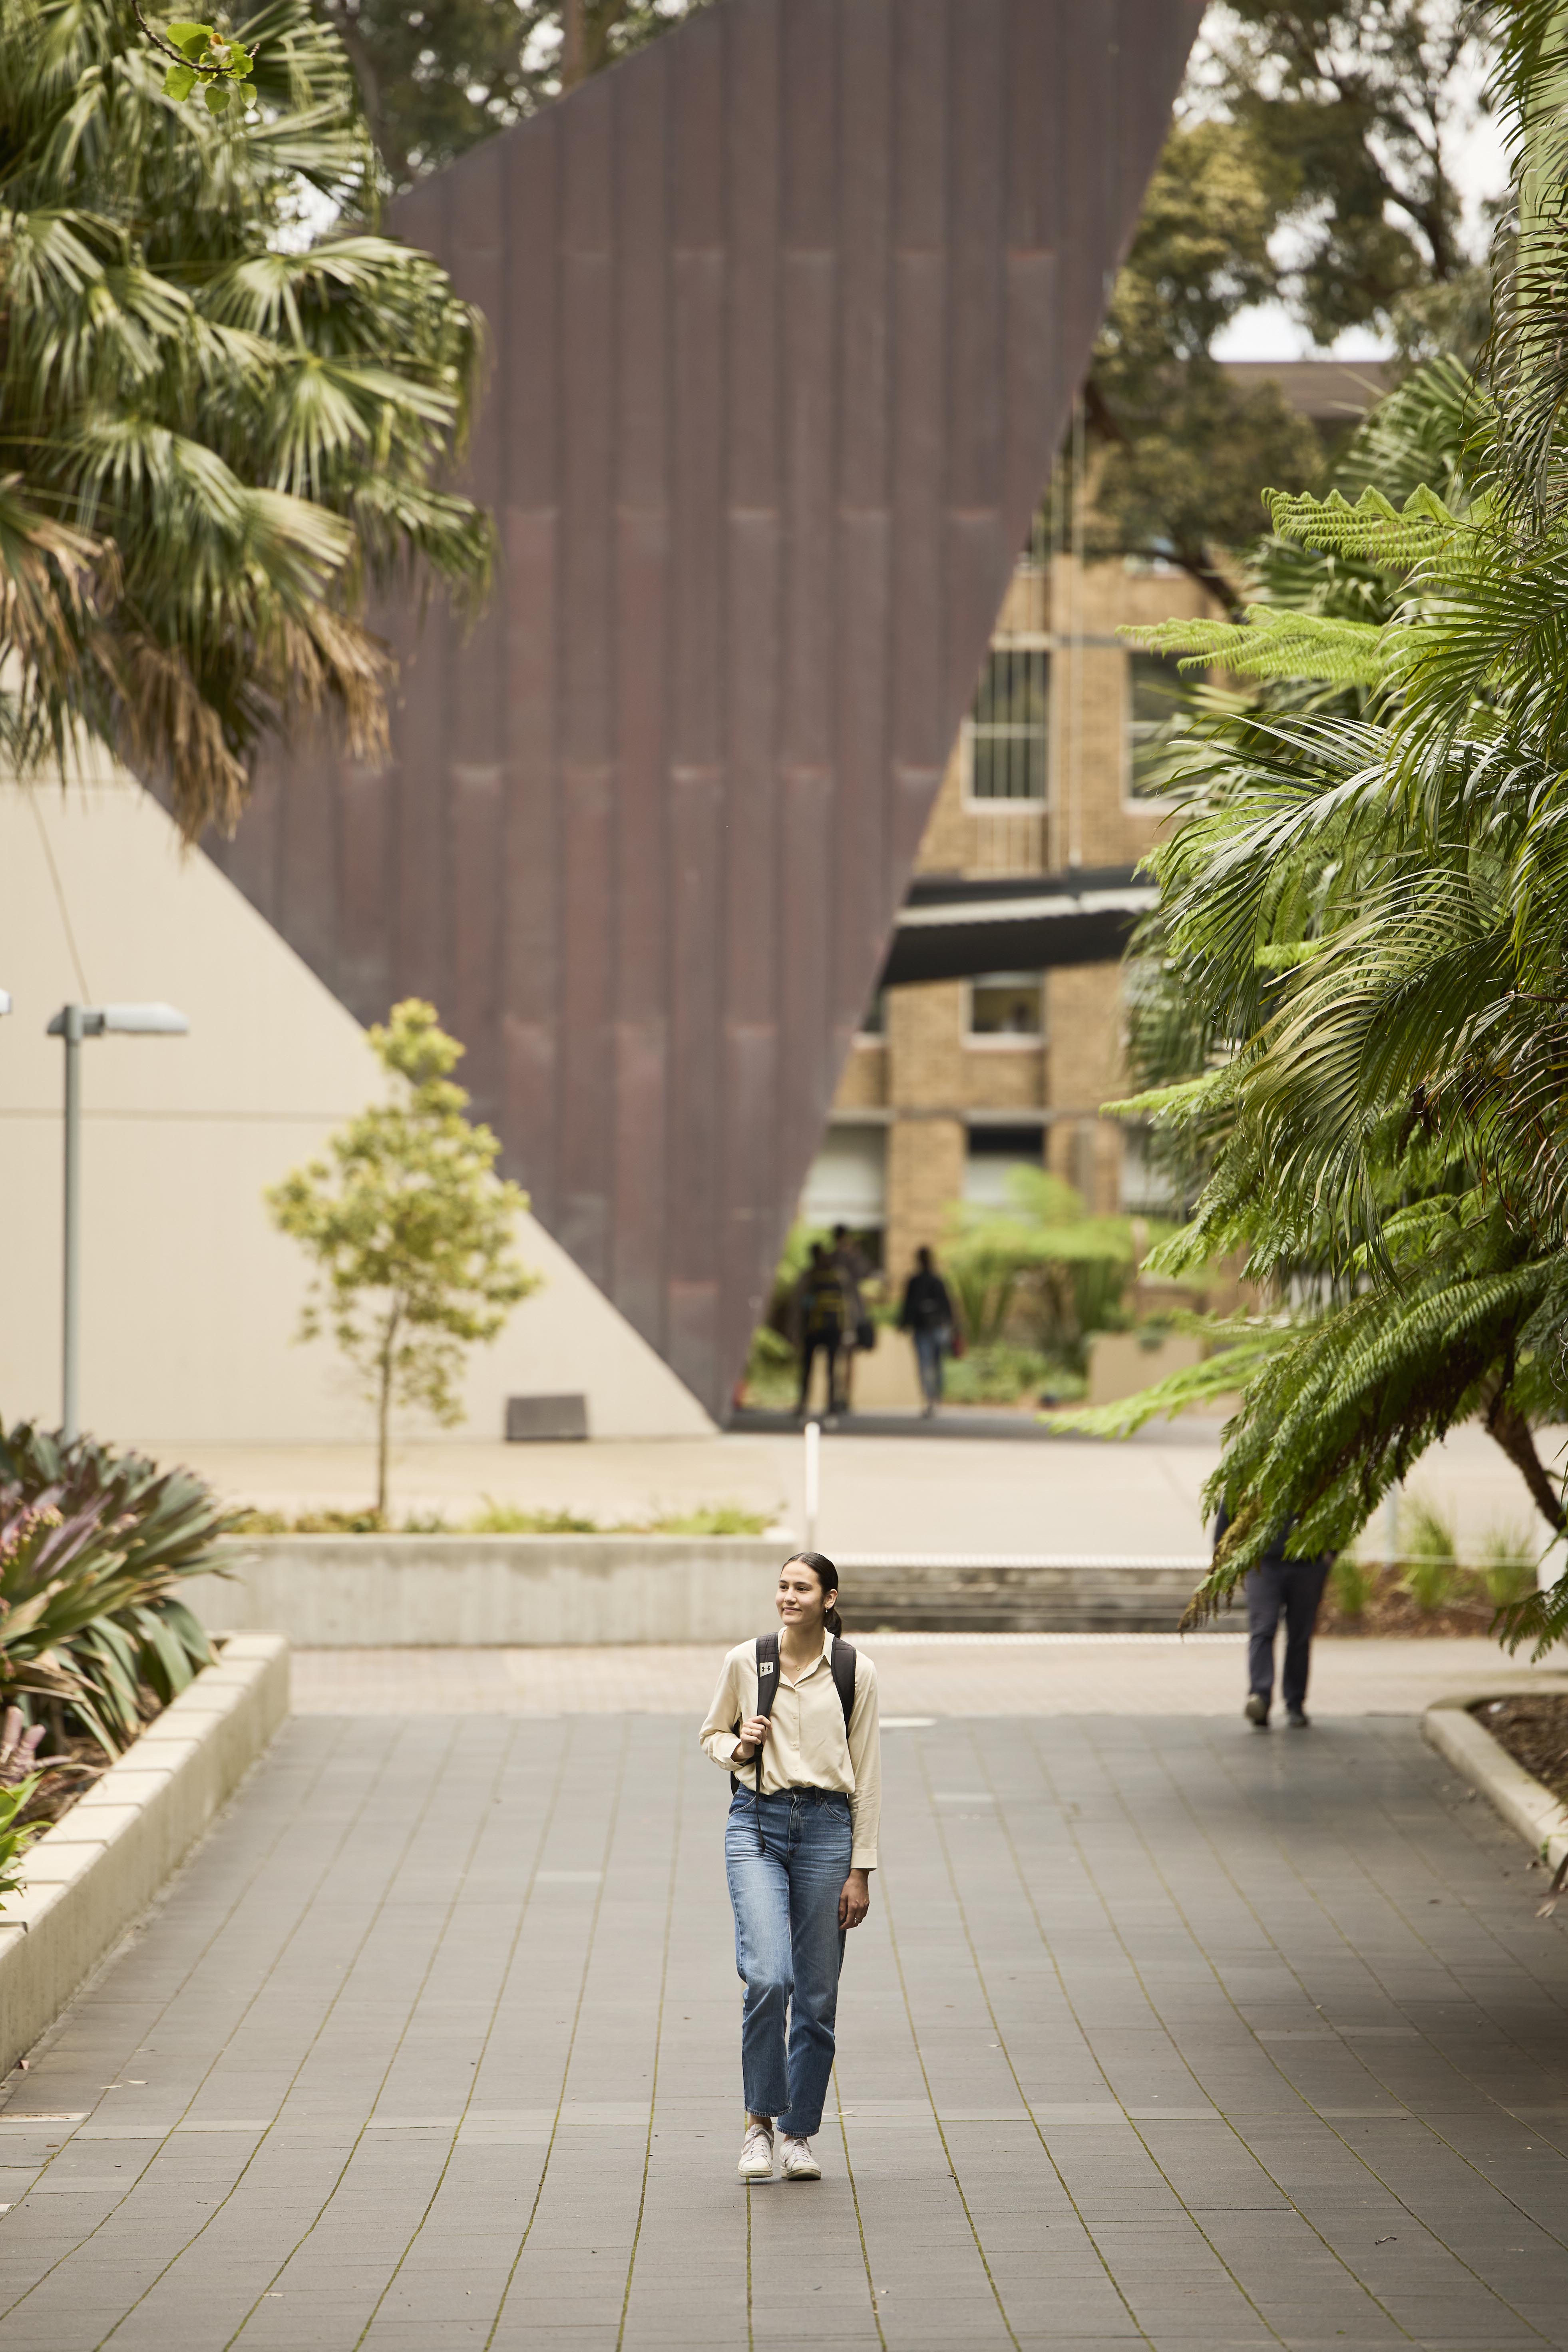 Sophie Fawns walking in the UNSW campus with a backpack on